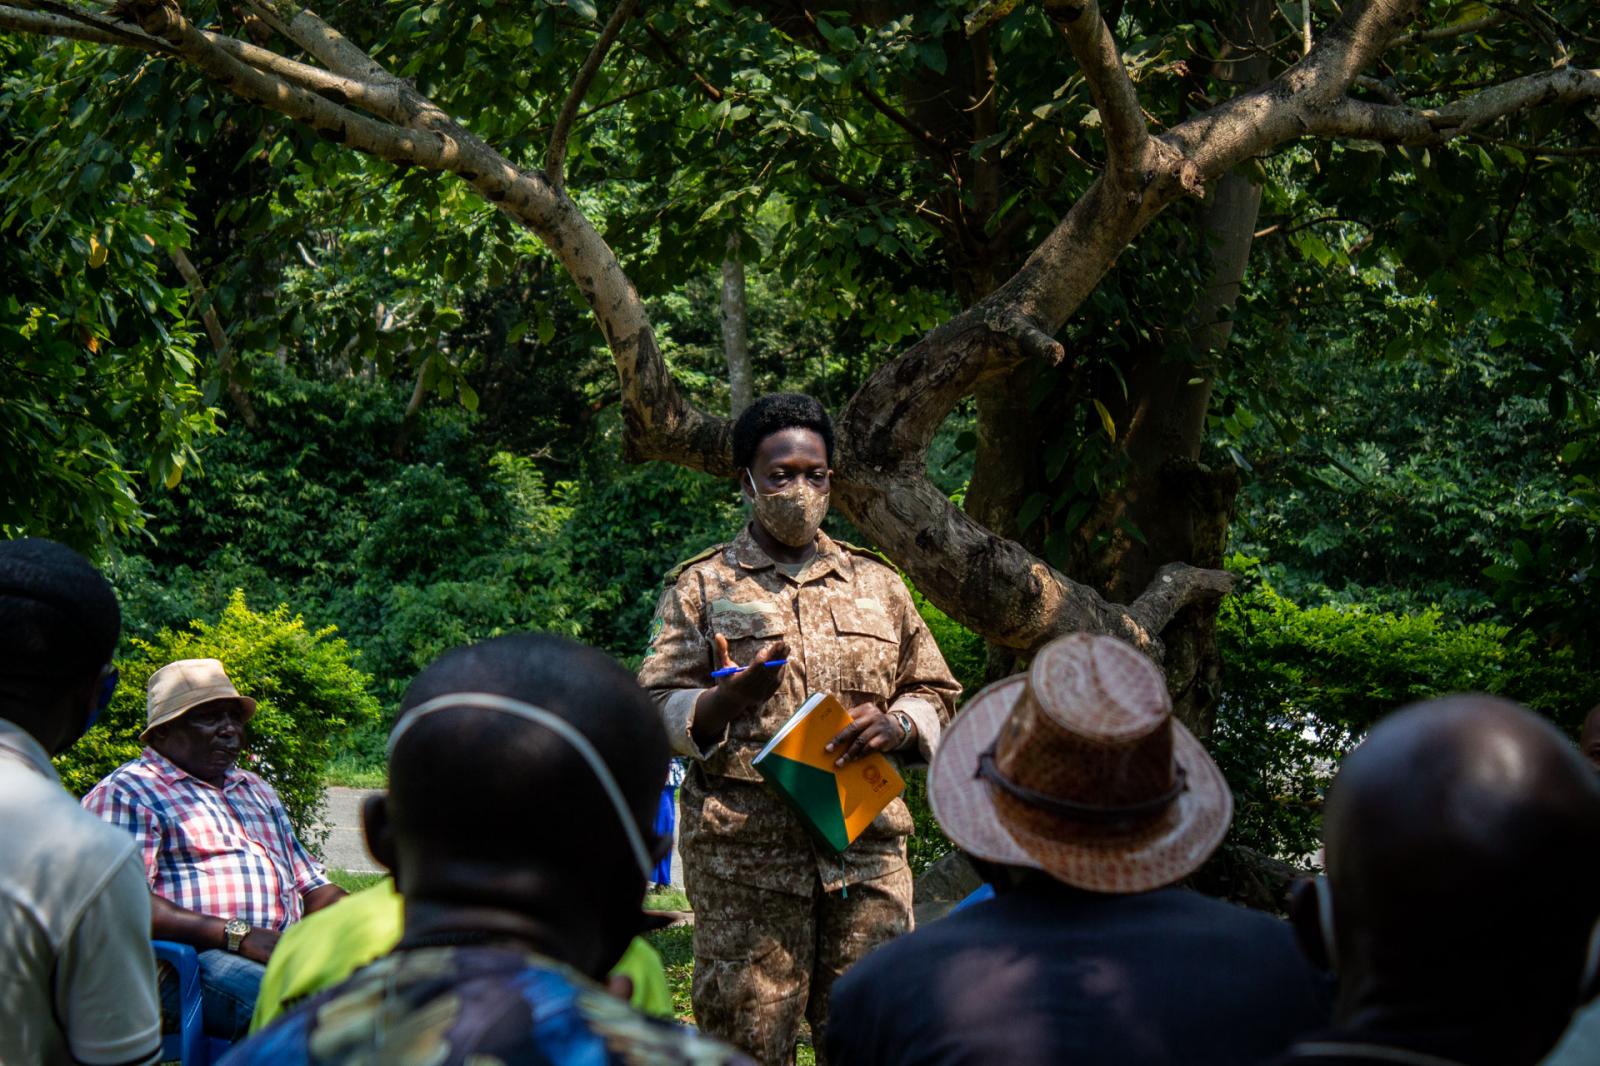 Nora Mbubi talks to members of the community about activities taking place in the forest. Community outreach programmes are important as they help people understand the importance of wildlife conservation.